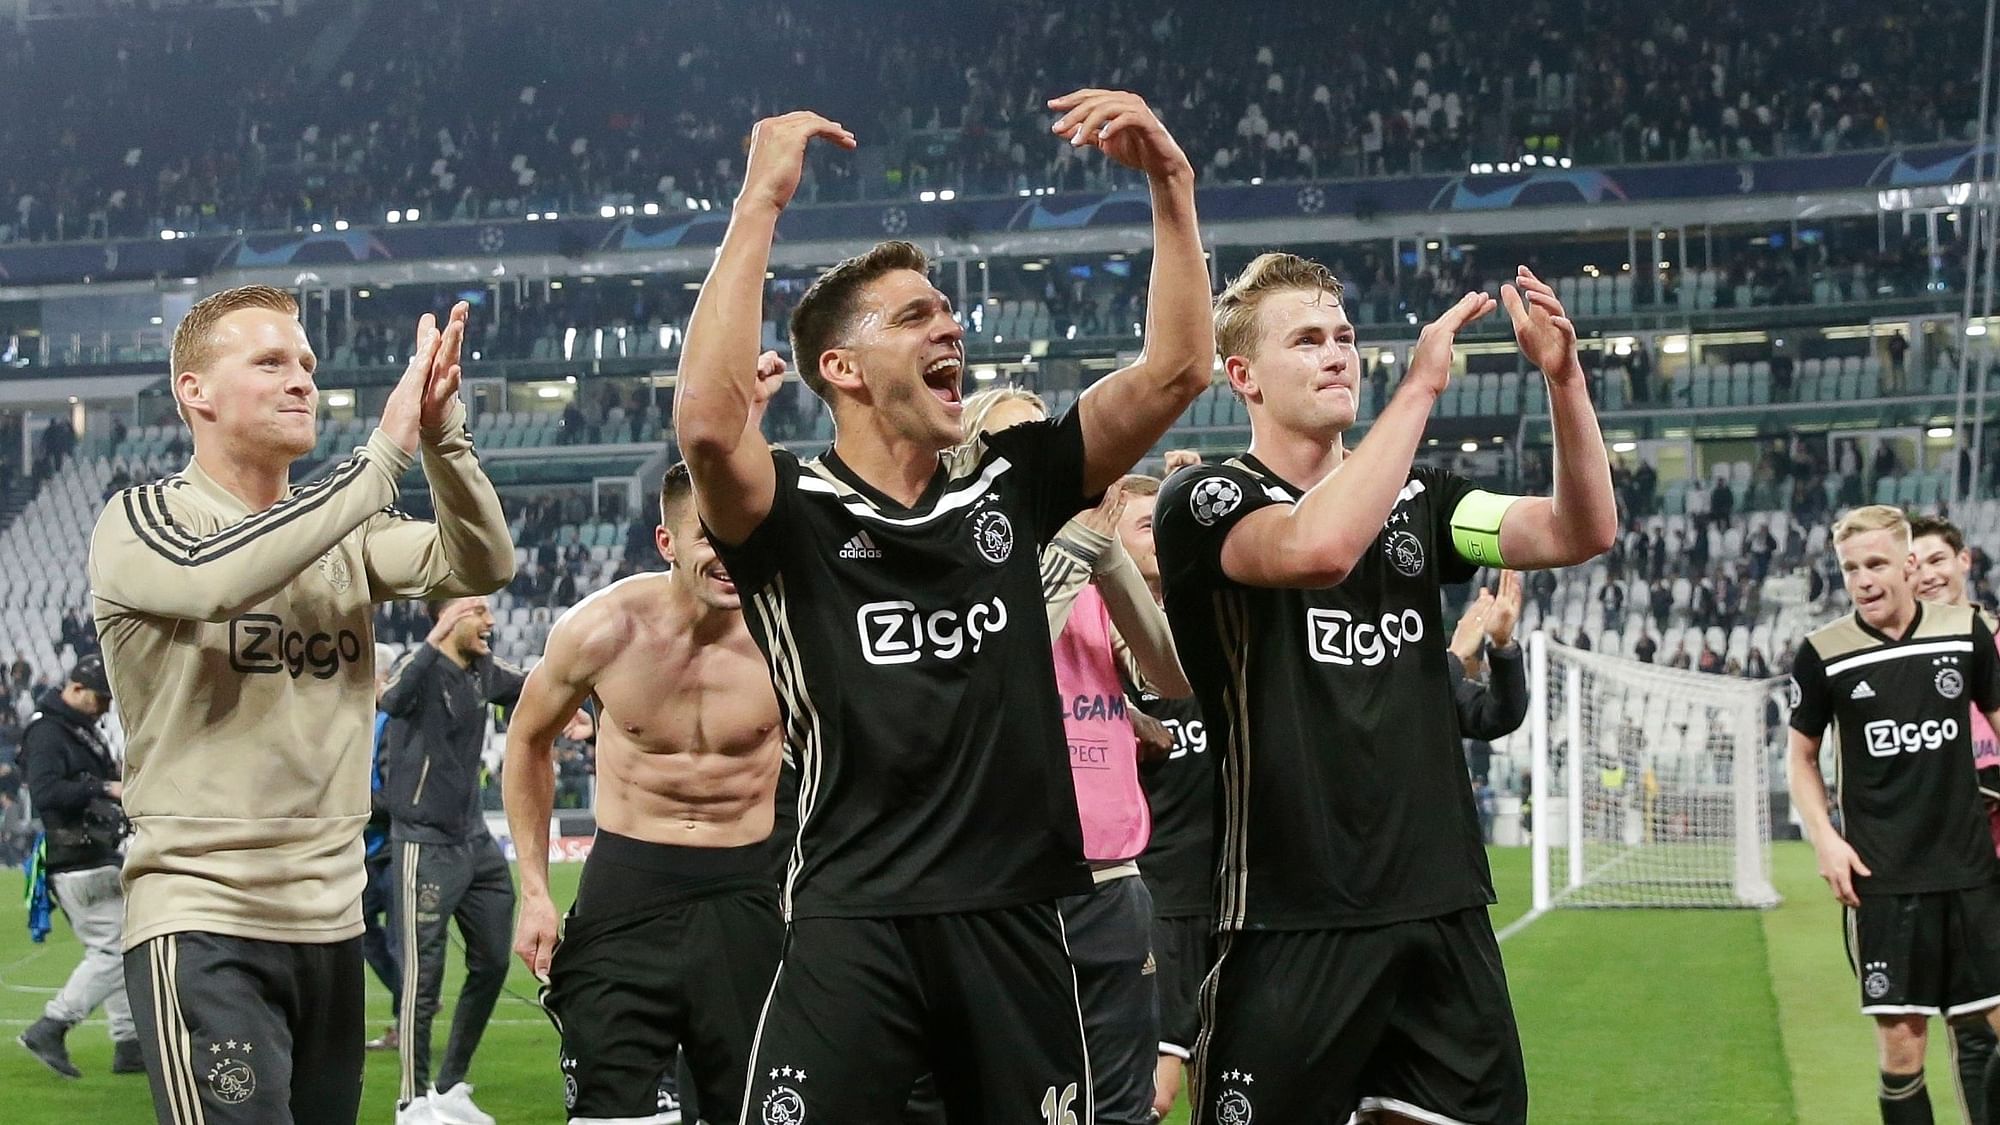 Ajax’ players celebrate at the end of the Champions League, quarterfinal, second leg soccer match between Juventus and Ajax, at the Allianz stadium in Turin, Italy, Tuesday, April 16, 2019. Ajax won 2-1 and advances to the semifinal on a 3-2 aggregate.